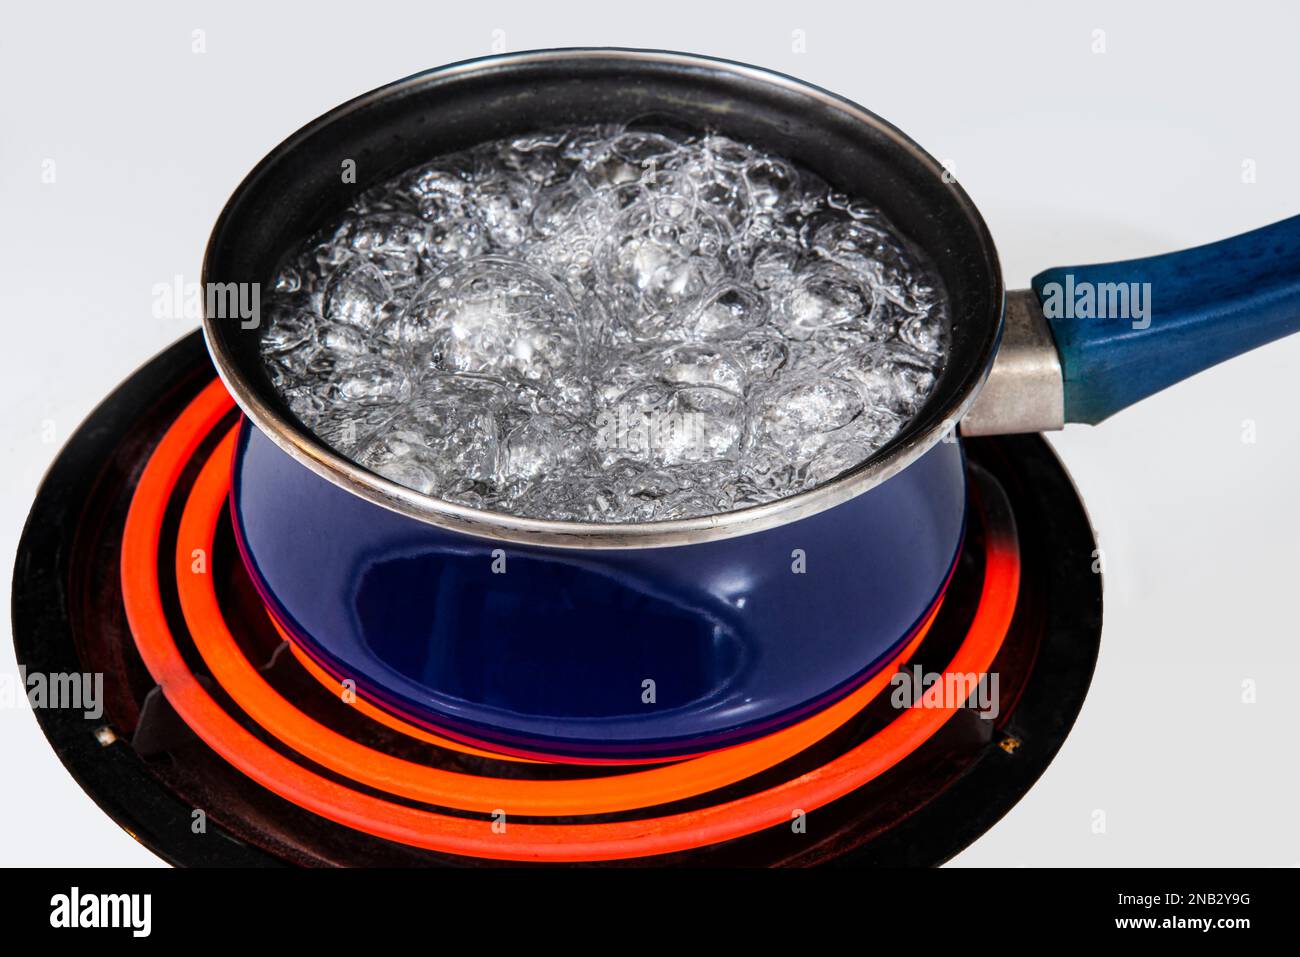 https://c8.alamy.com/comp/2NB2Y9G/horizontal-shot-of-a-blue-pot-on-a-stove-top-on-a-red-hot-burner-holding-water-at-a-hard-rolling-boil-copy-space-2NB2Y9G.jpg